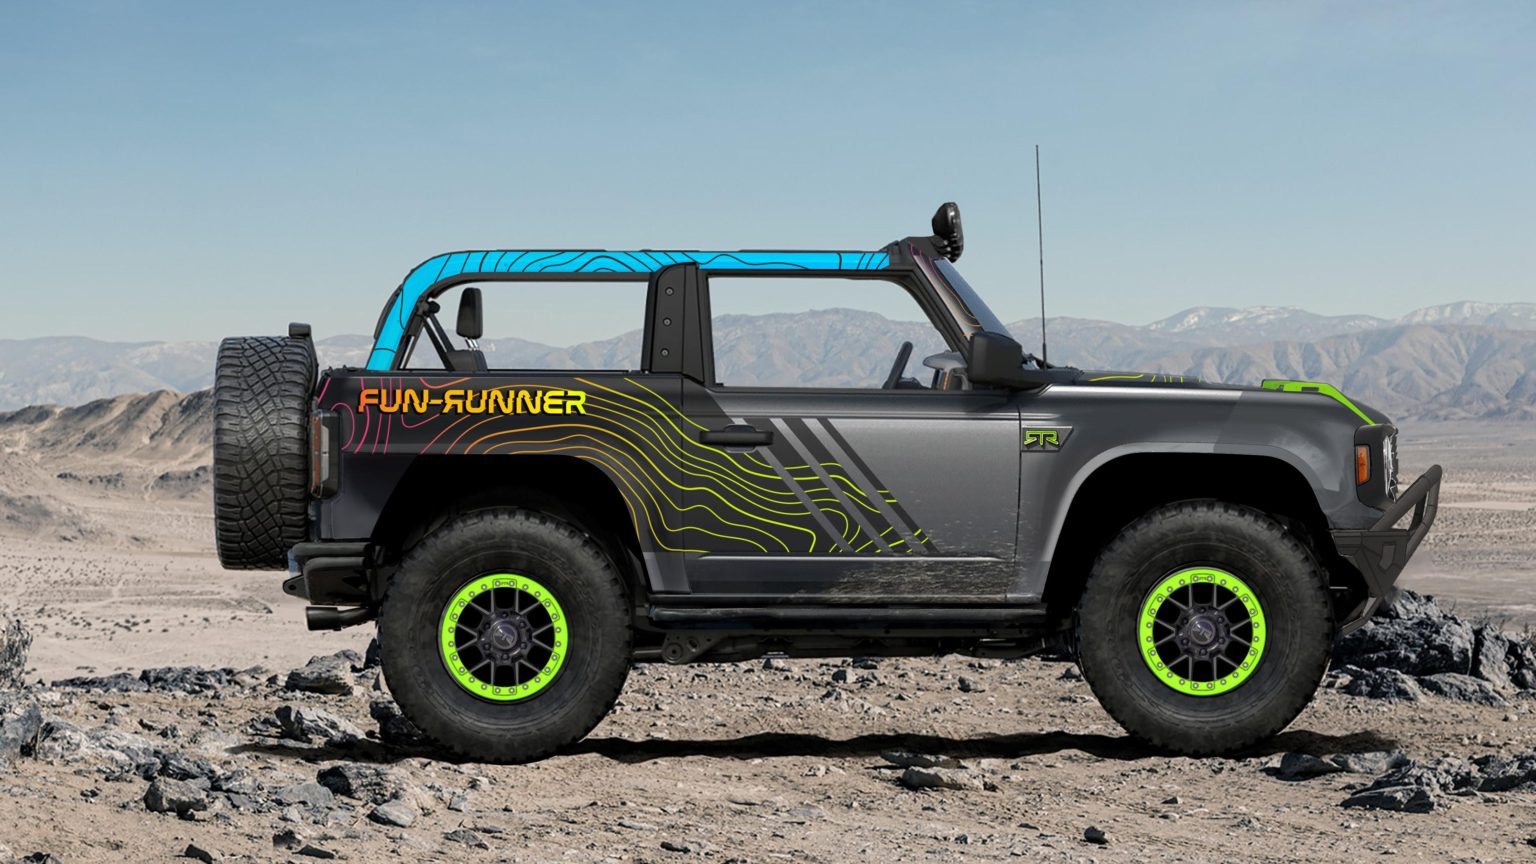 The Bronco RTR features a fun livery and several off-road upgrades.